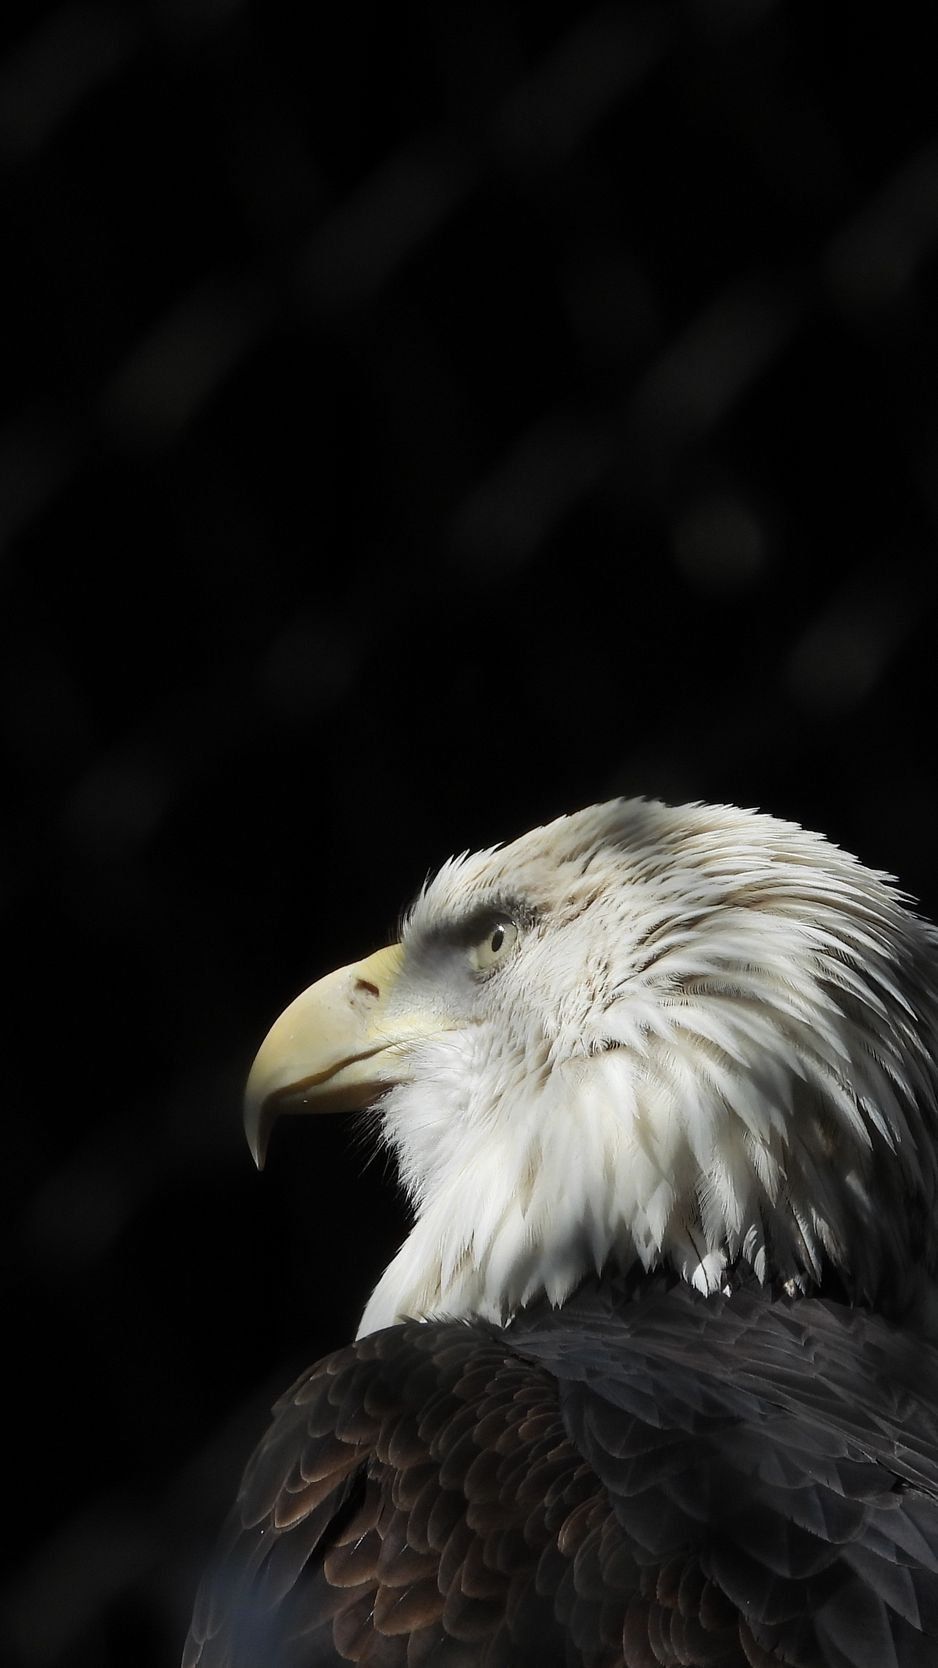 Iphone 7 Wallpapers Hd Eagle